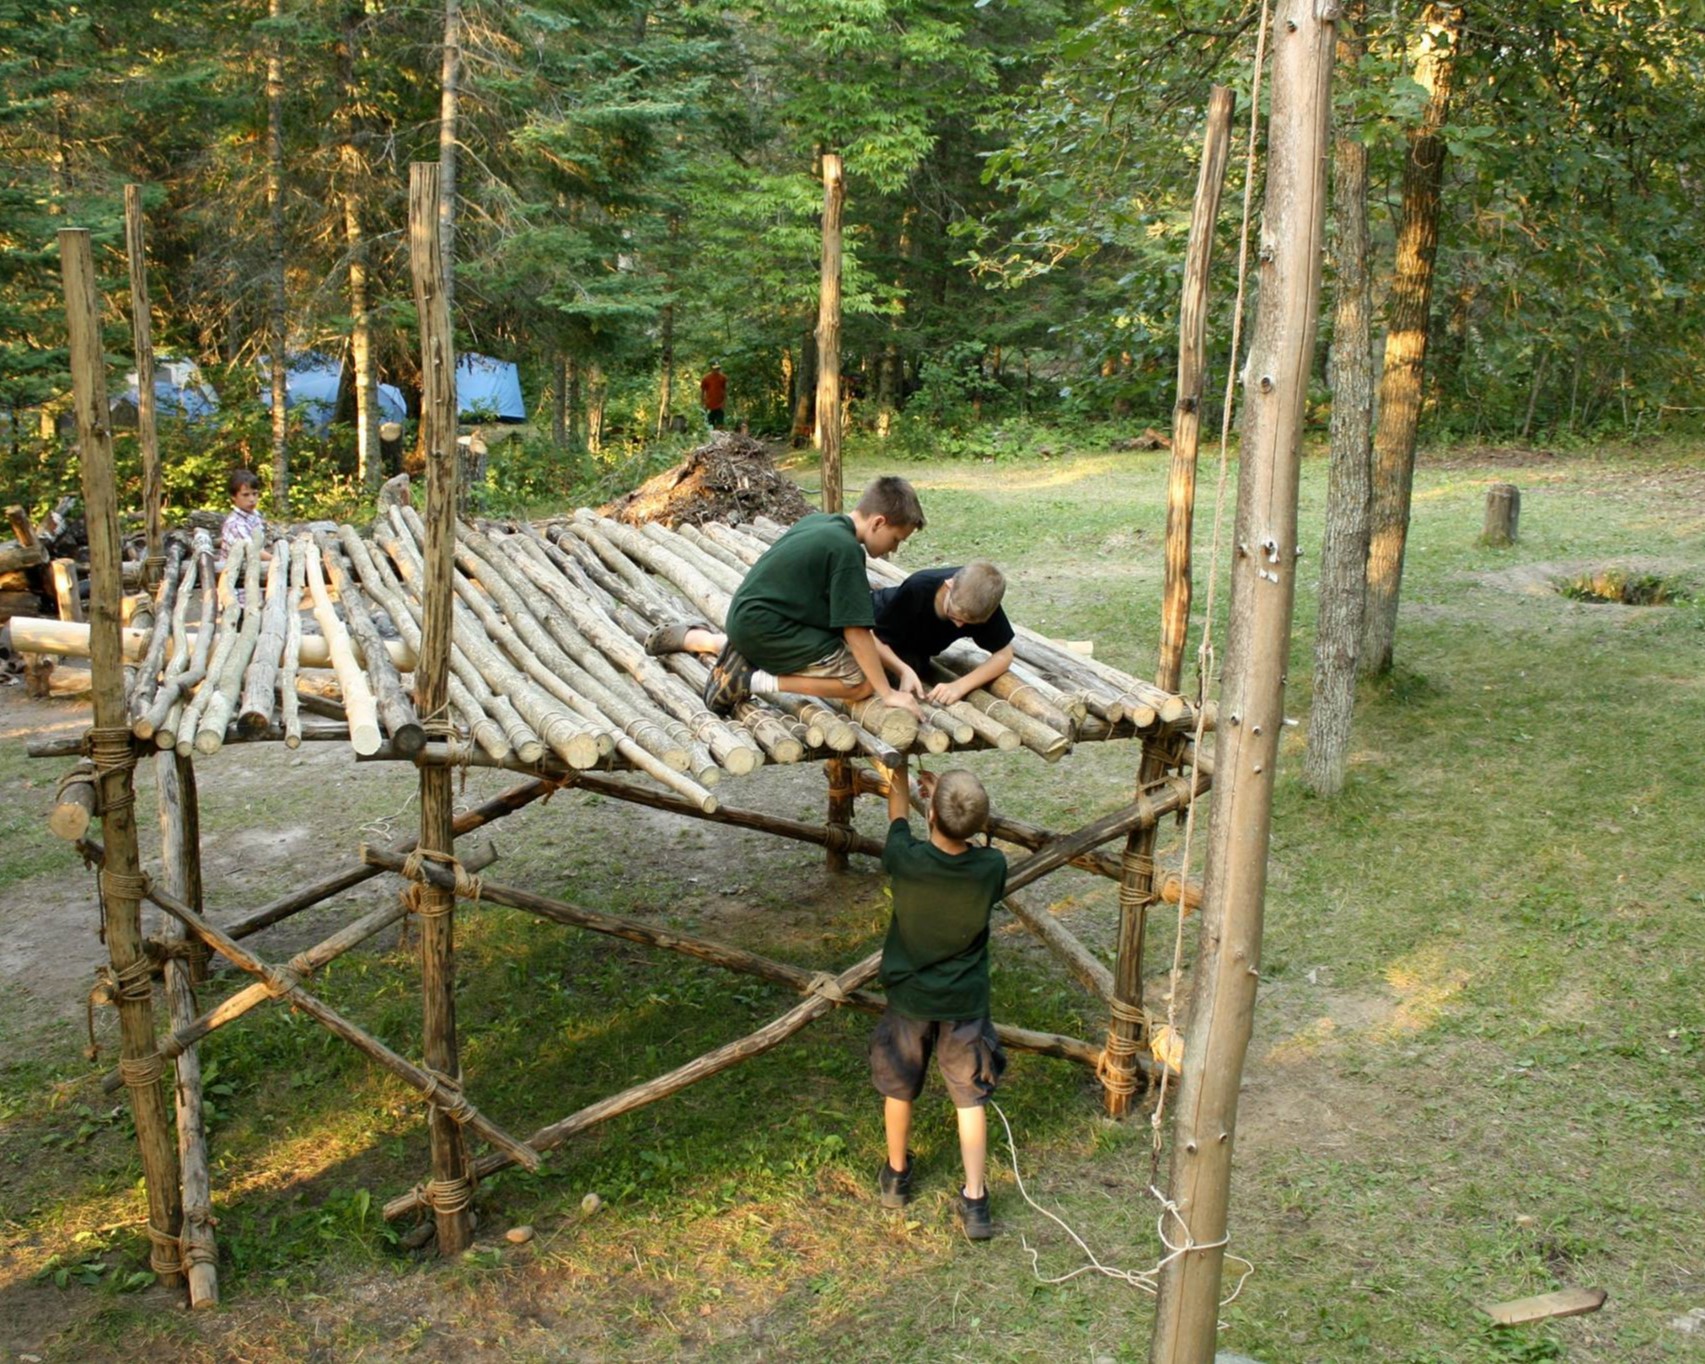 A group of Scouts are lashing together a platform whose top is around 4 feet off of the ground